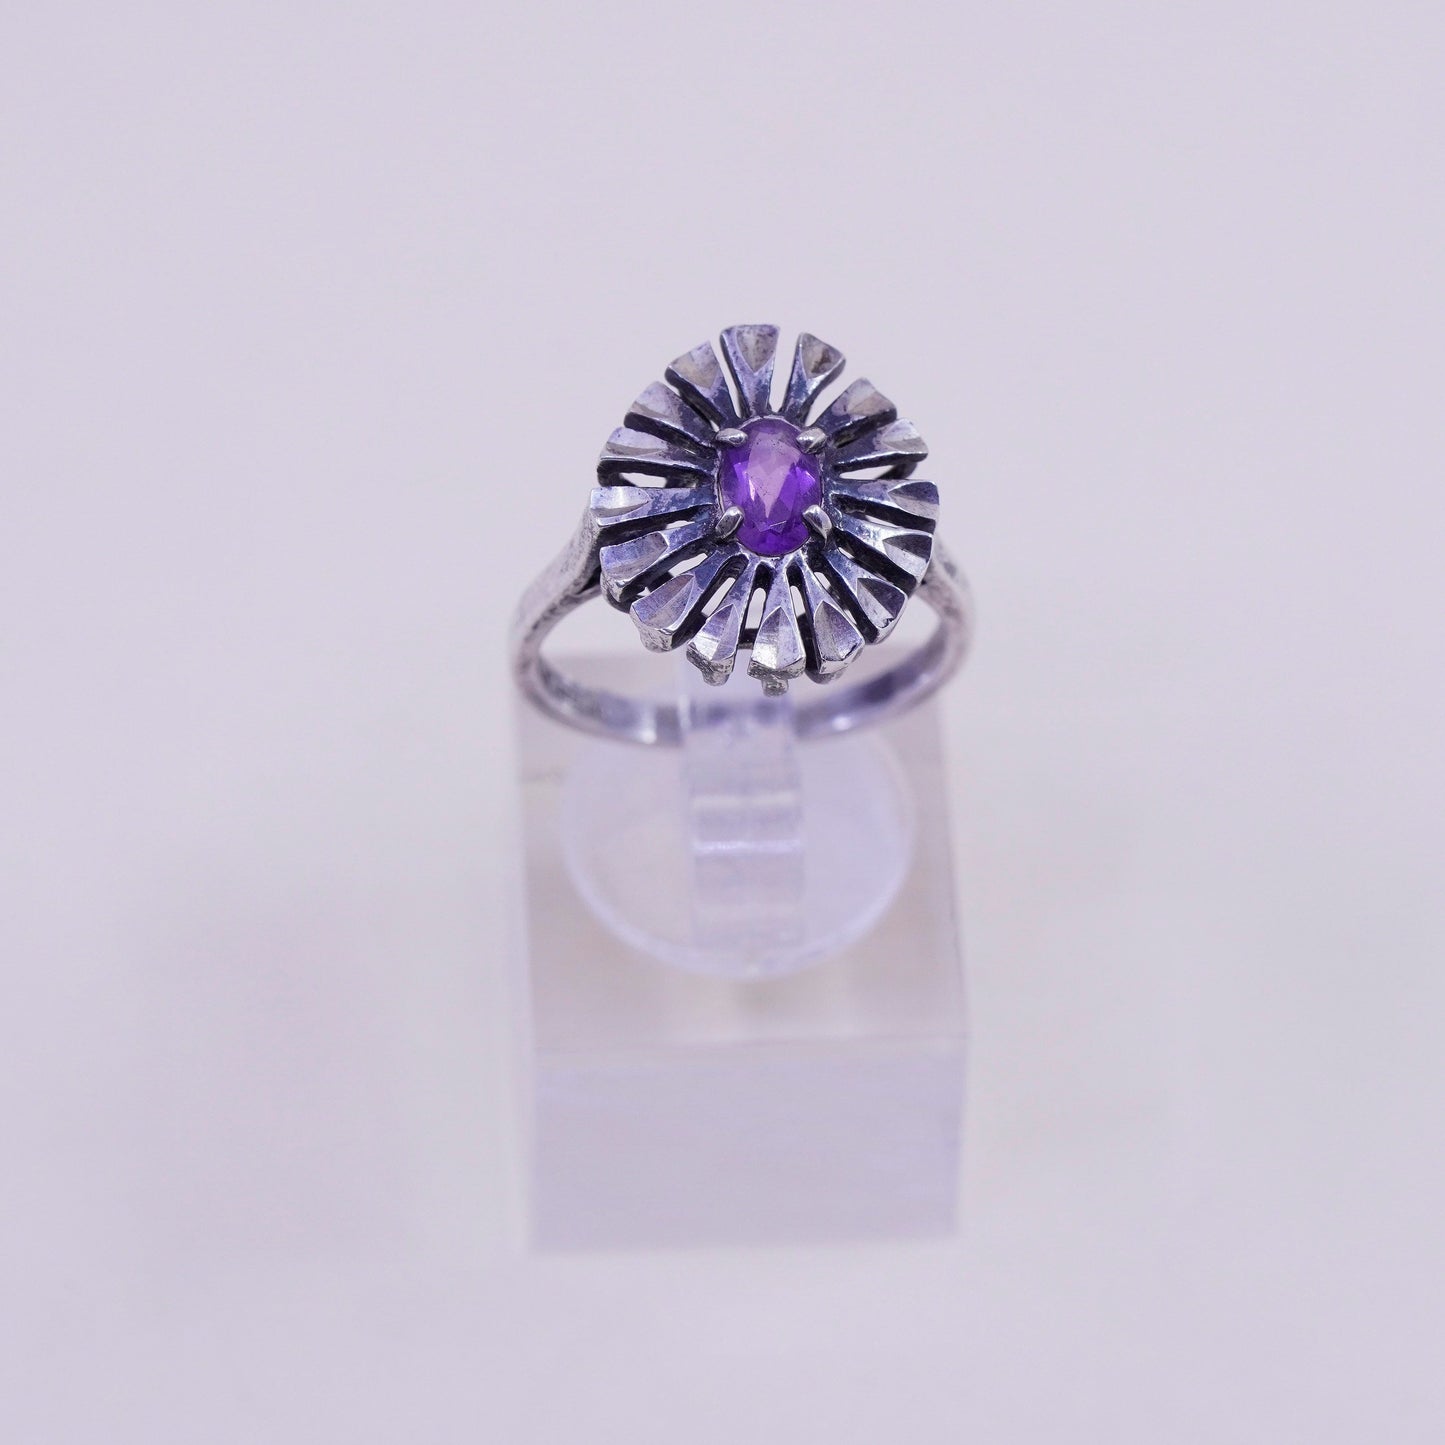 Size 7.25, vintage Kabana 925 silver handmade flower ring with amethyst